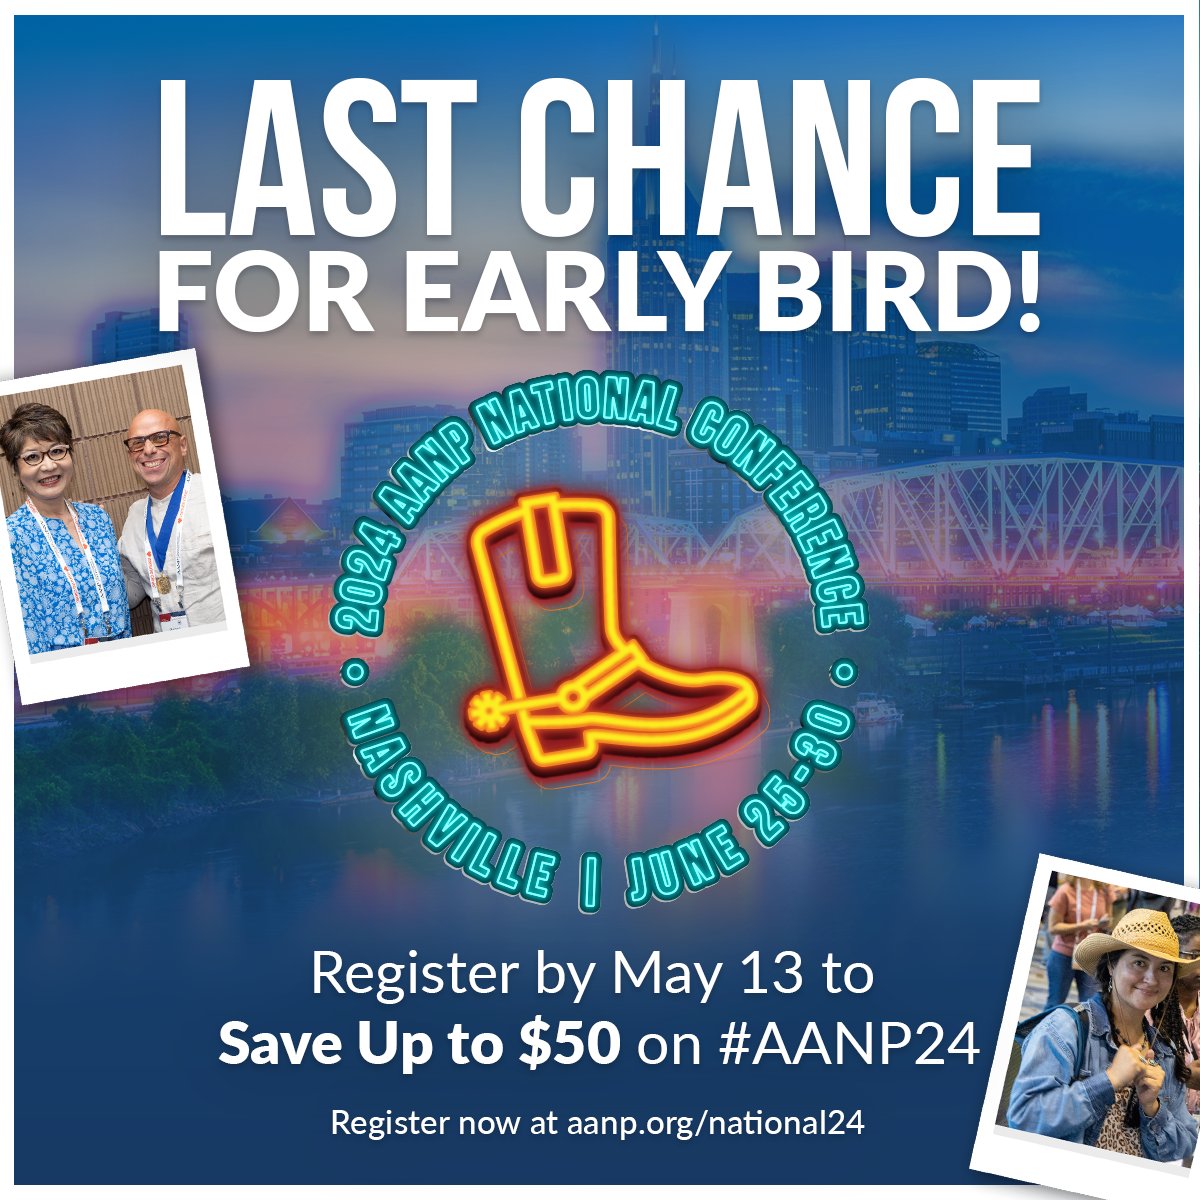 Early bird savings end tomorrow! #AANP24 provides unparalleled opportunities to build your professional network and explore Nashville, Tennessee, alongside your fellow NPs. Register by May 13 to secure your savings: nc.aanp.org. #NPsLead